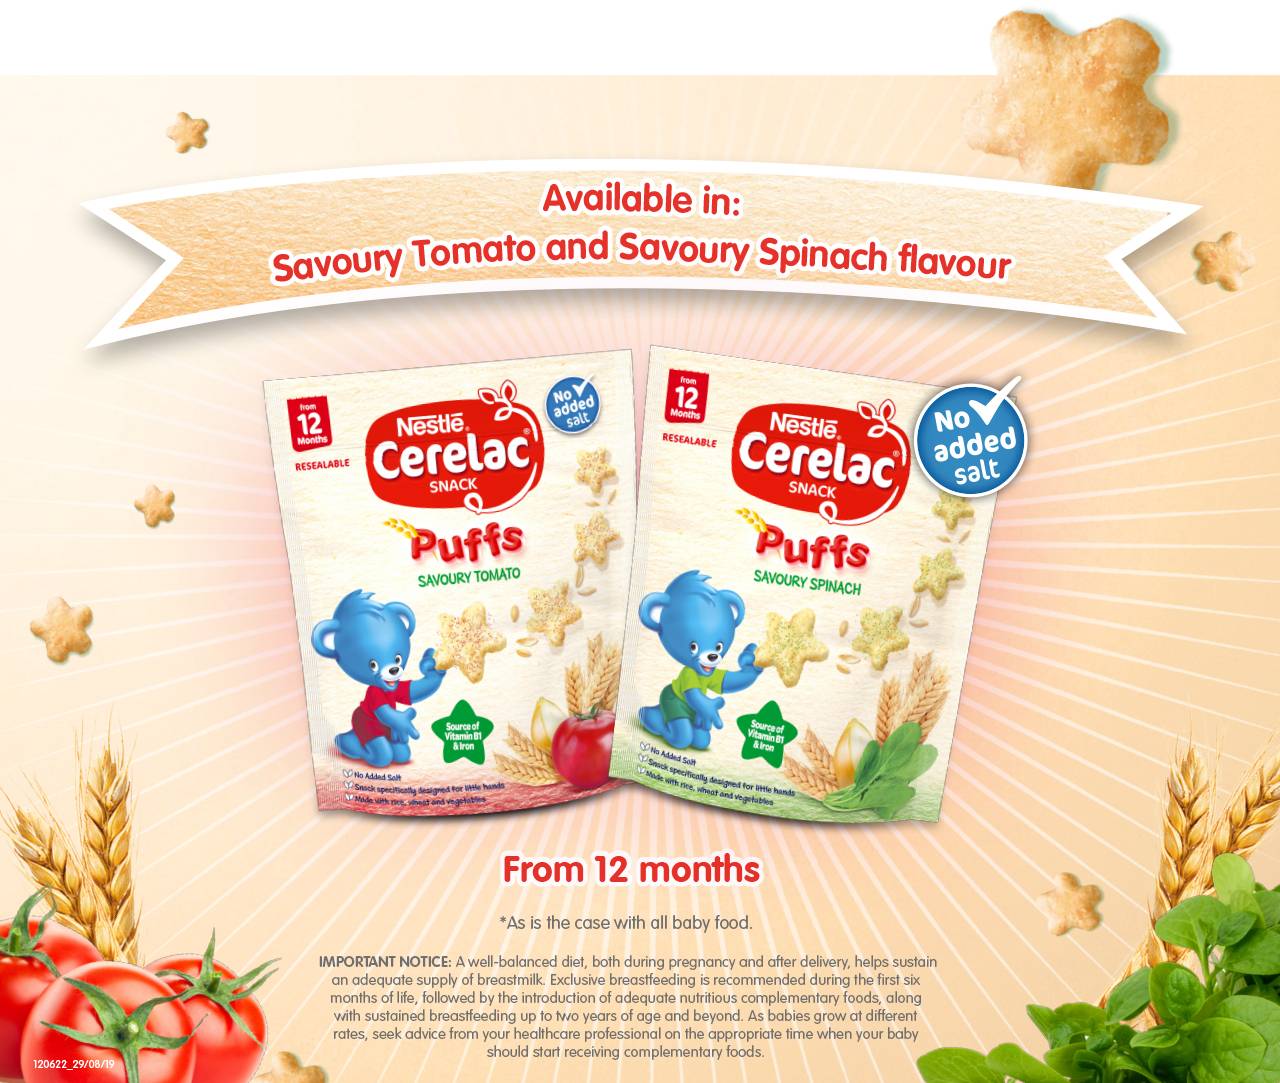 Nestlé Cerelac Puffs are available in Savoury Tomato and Savoury Spinach flavour.